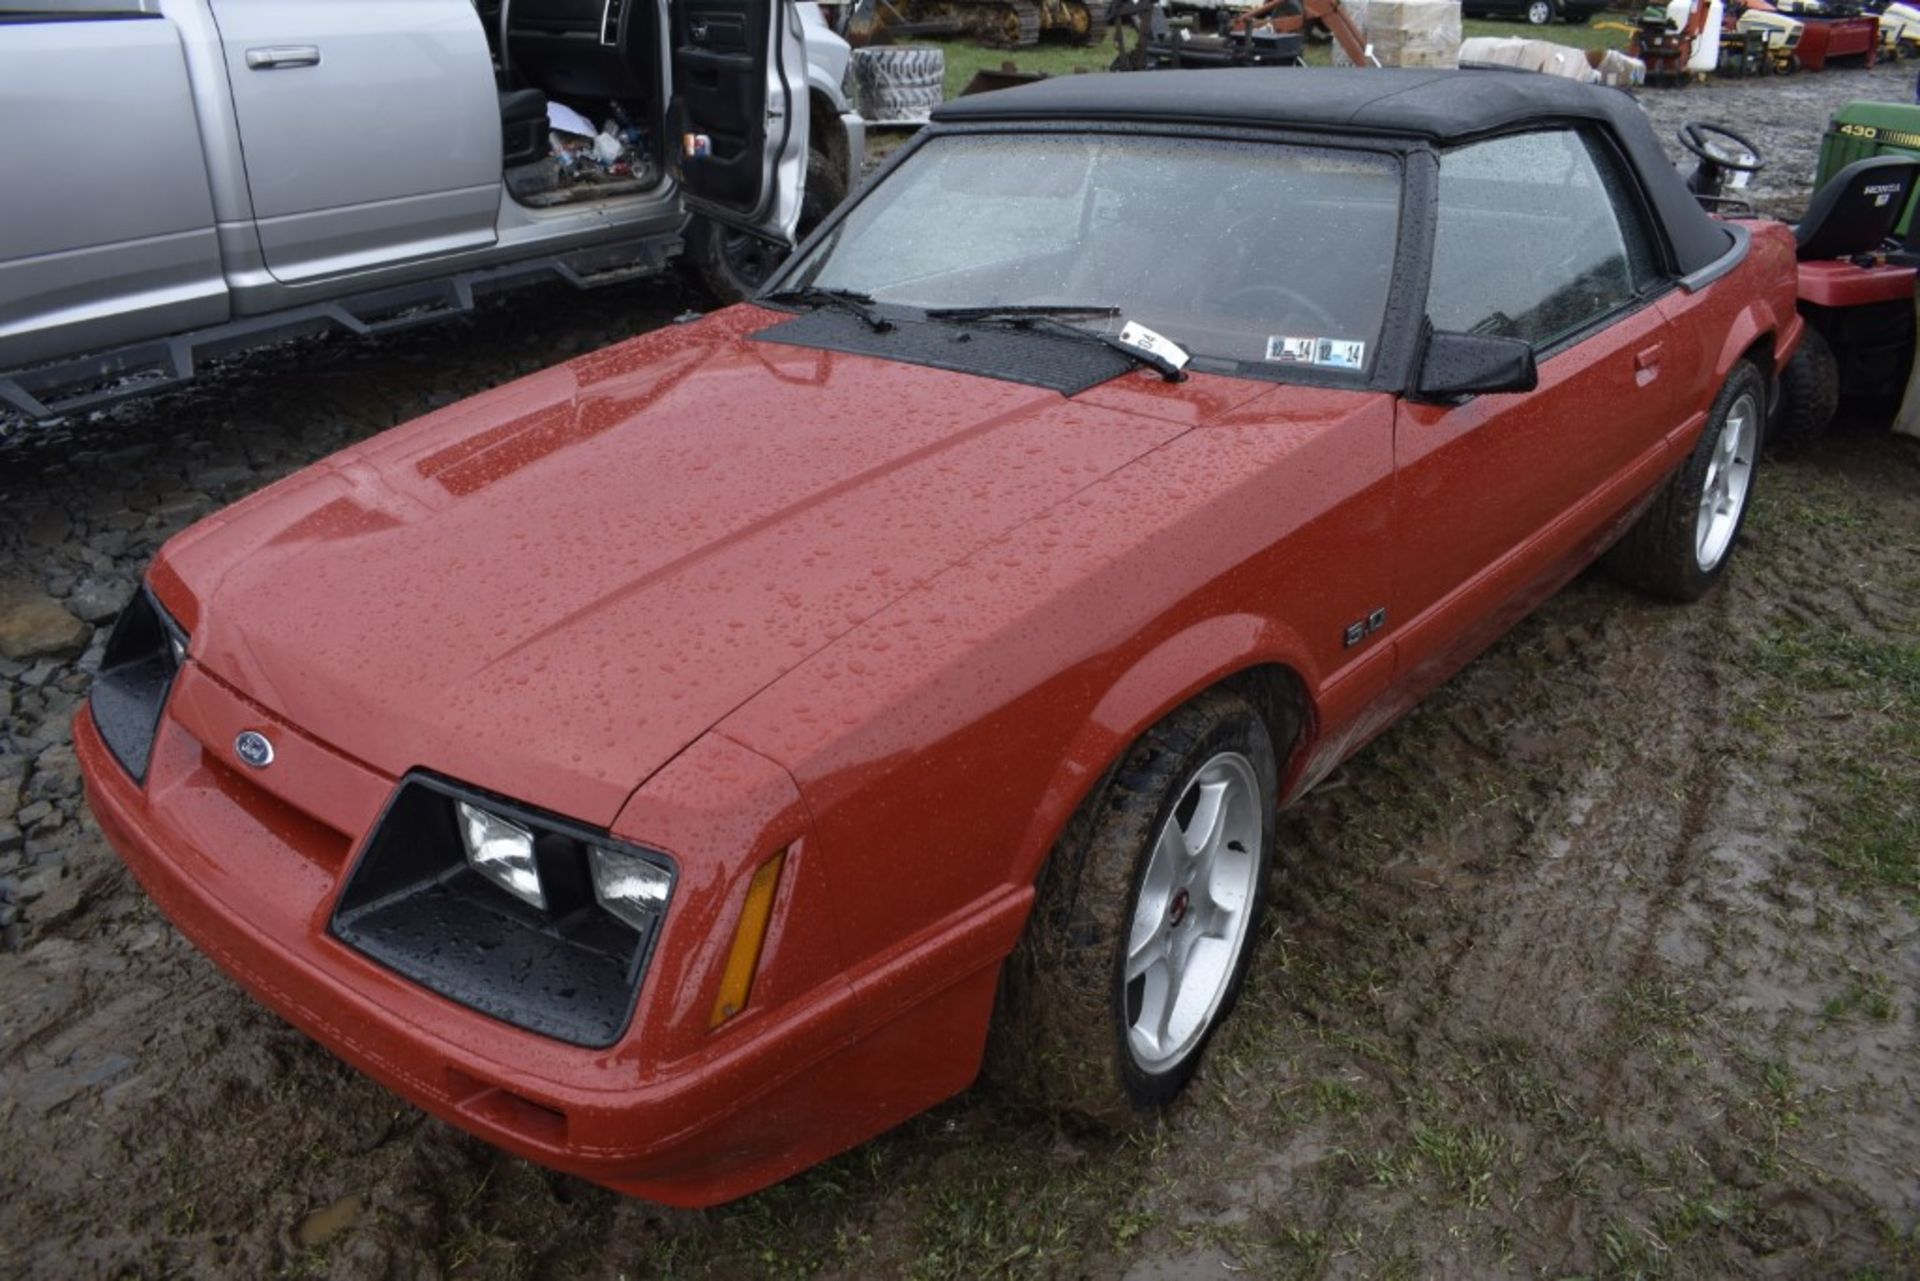 1986 Ford Mustang 5.0 Convertible - Image 6 of 44